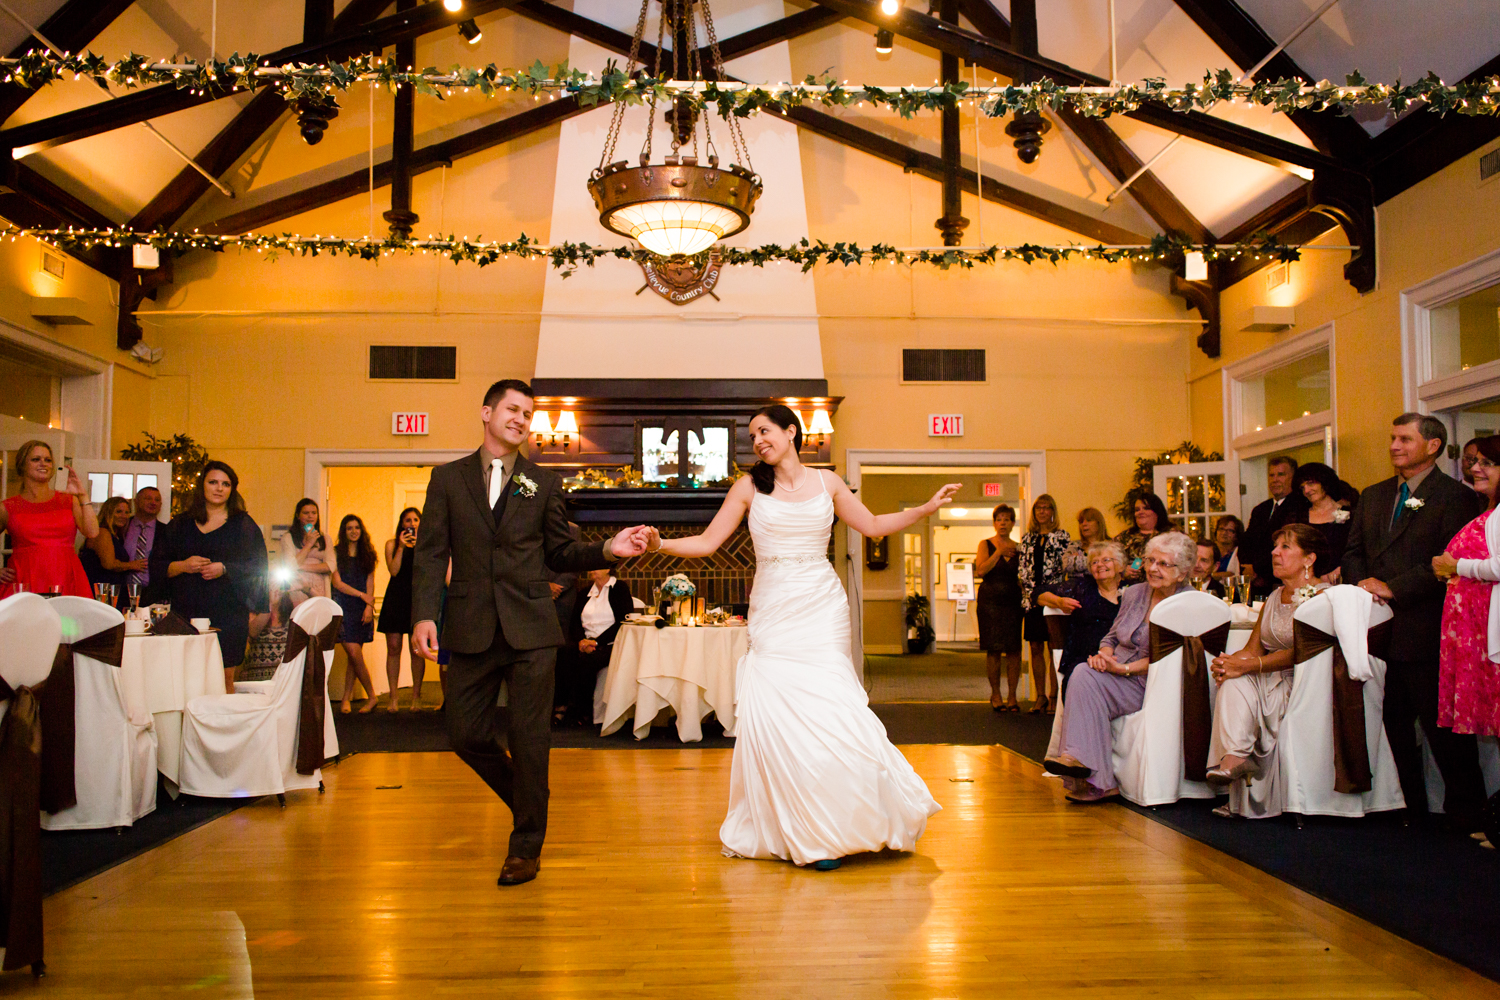  Bride and groom share their first dance 